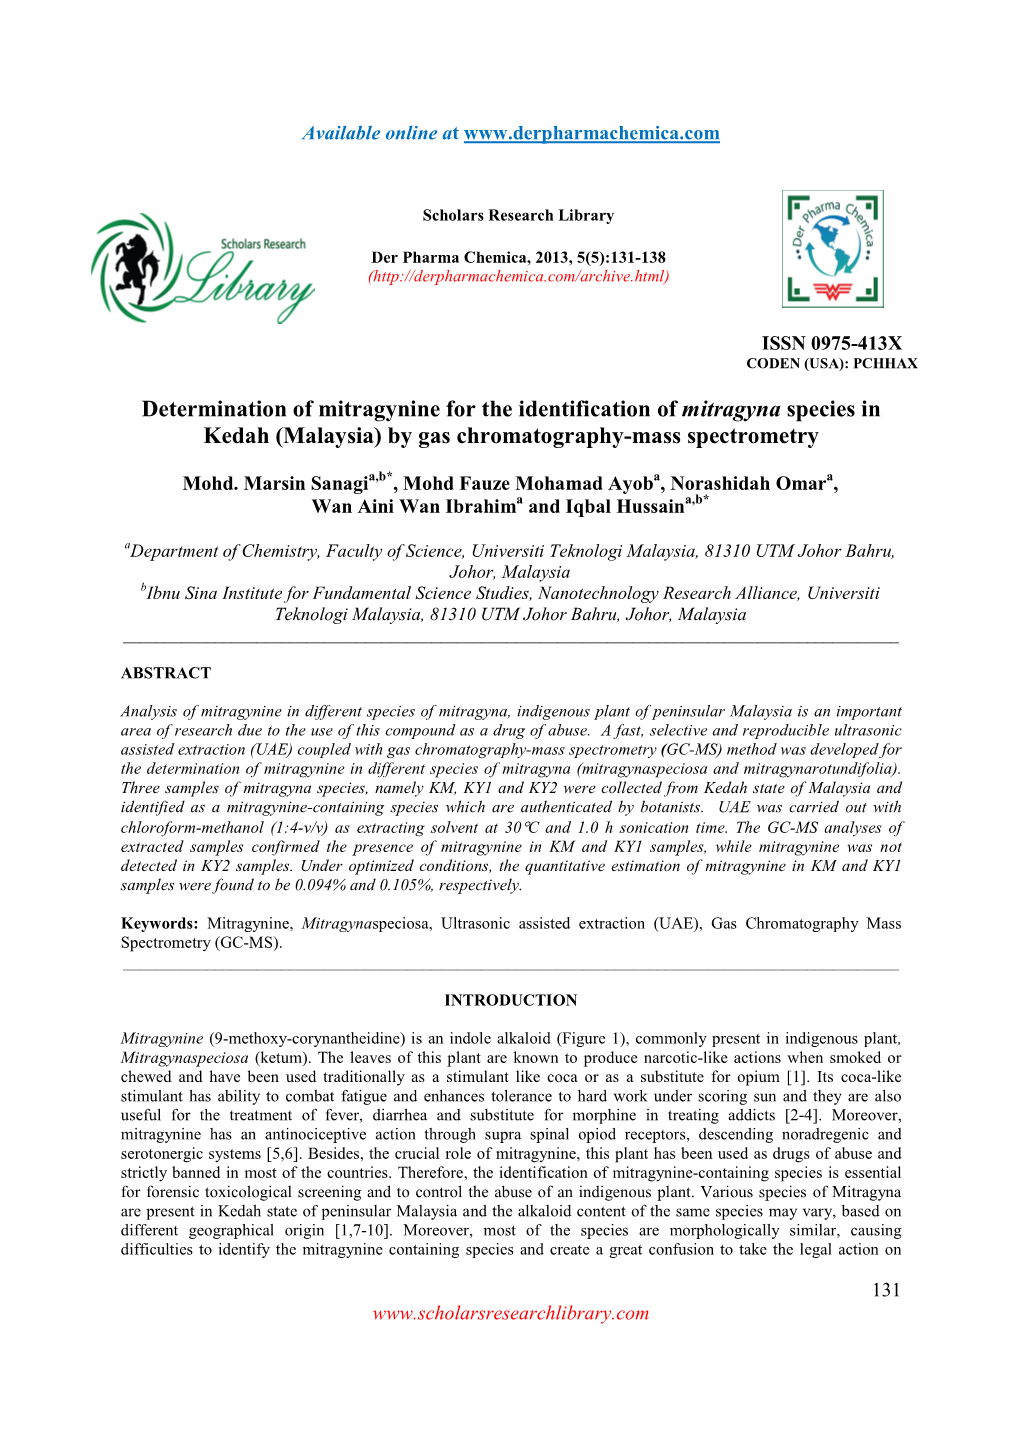 Determination of Mitragynine for the Identification of Mitragyna Species in Kedah (Malaysia) by Gas Chromatography-Mass Spectrometry